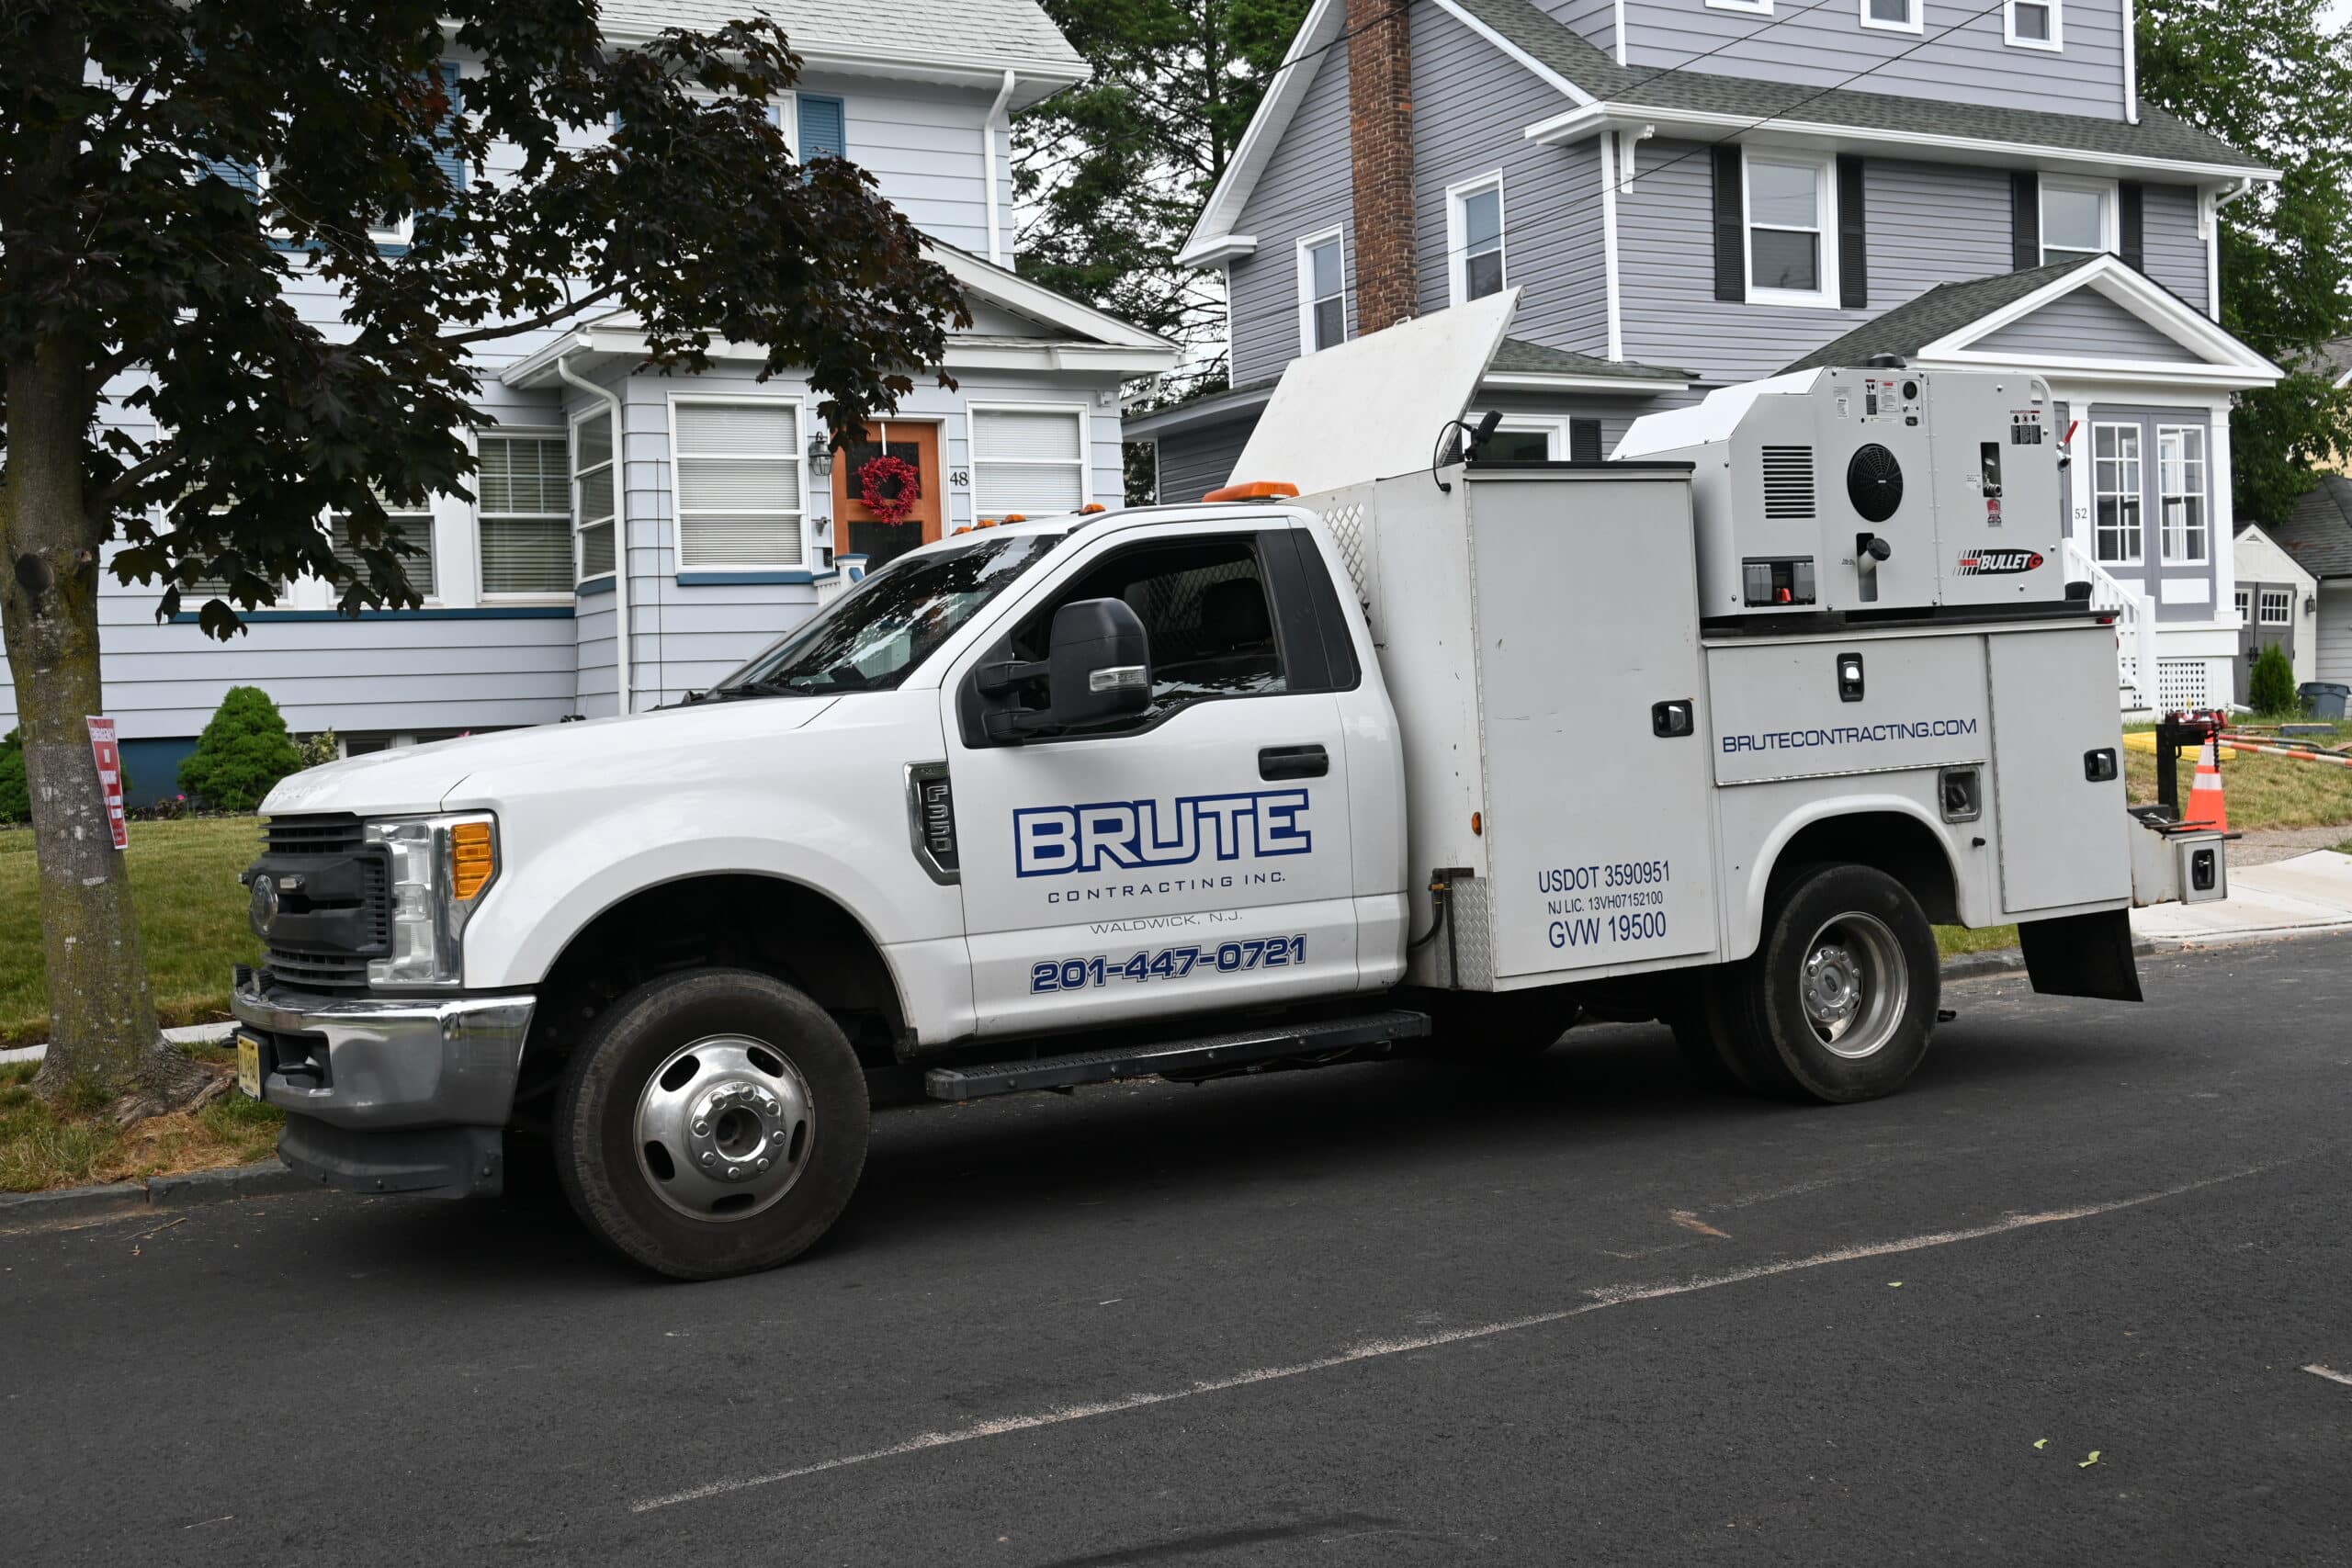 BRUTE Contracting sewer and water utility truck parked on the street during a trenchless sewer repair service in New Jersey